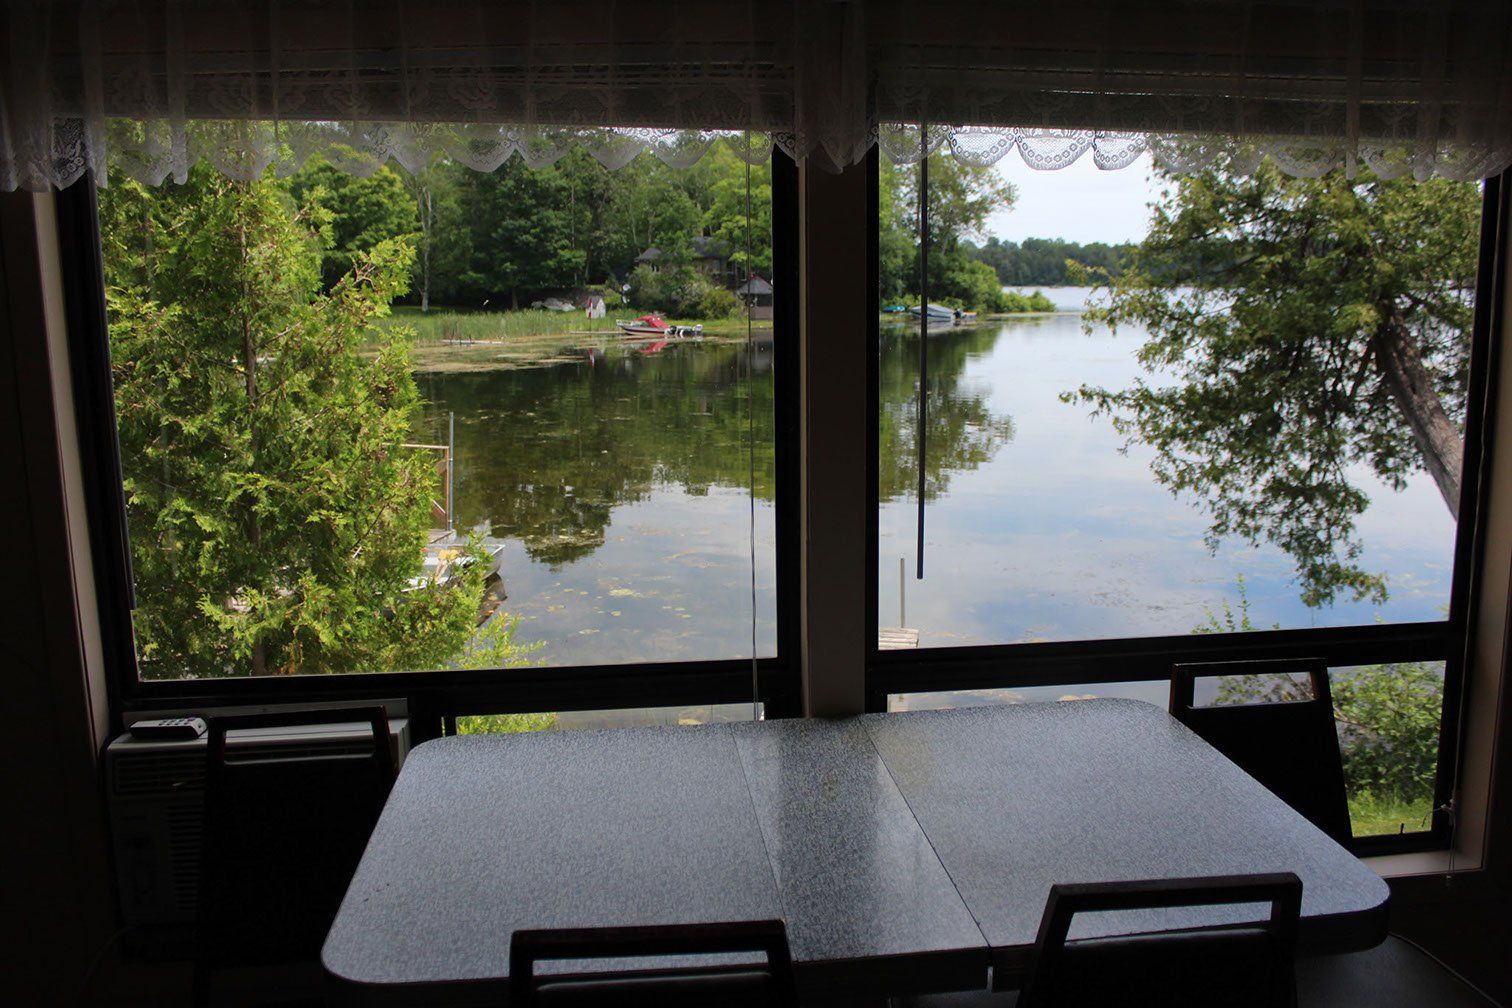 A table and chairs in front of a window overlooking a lake